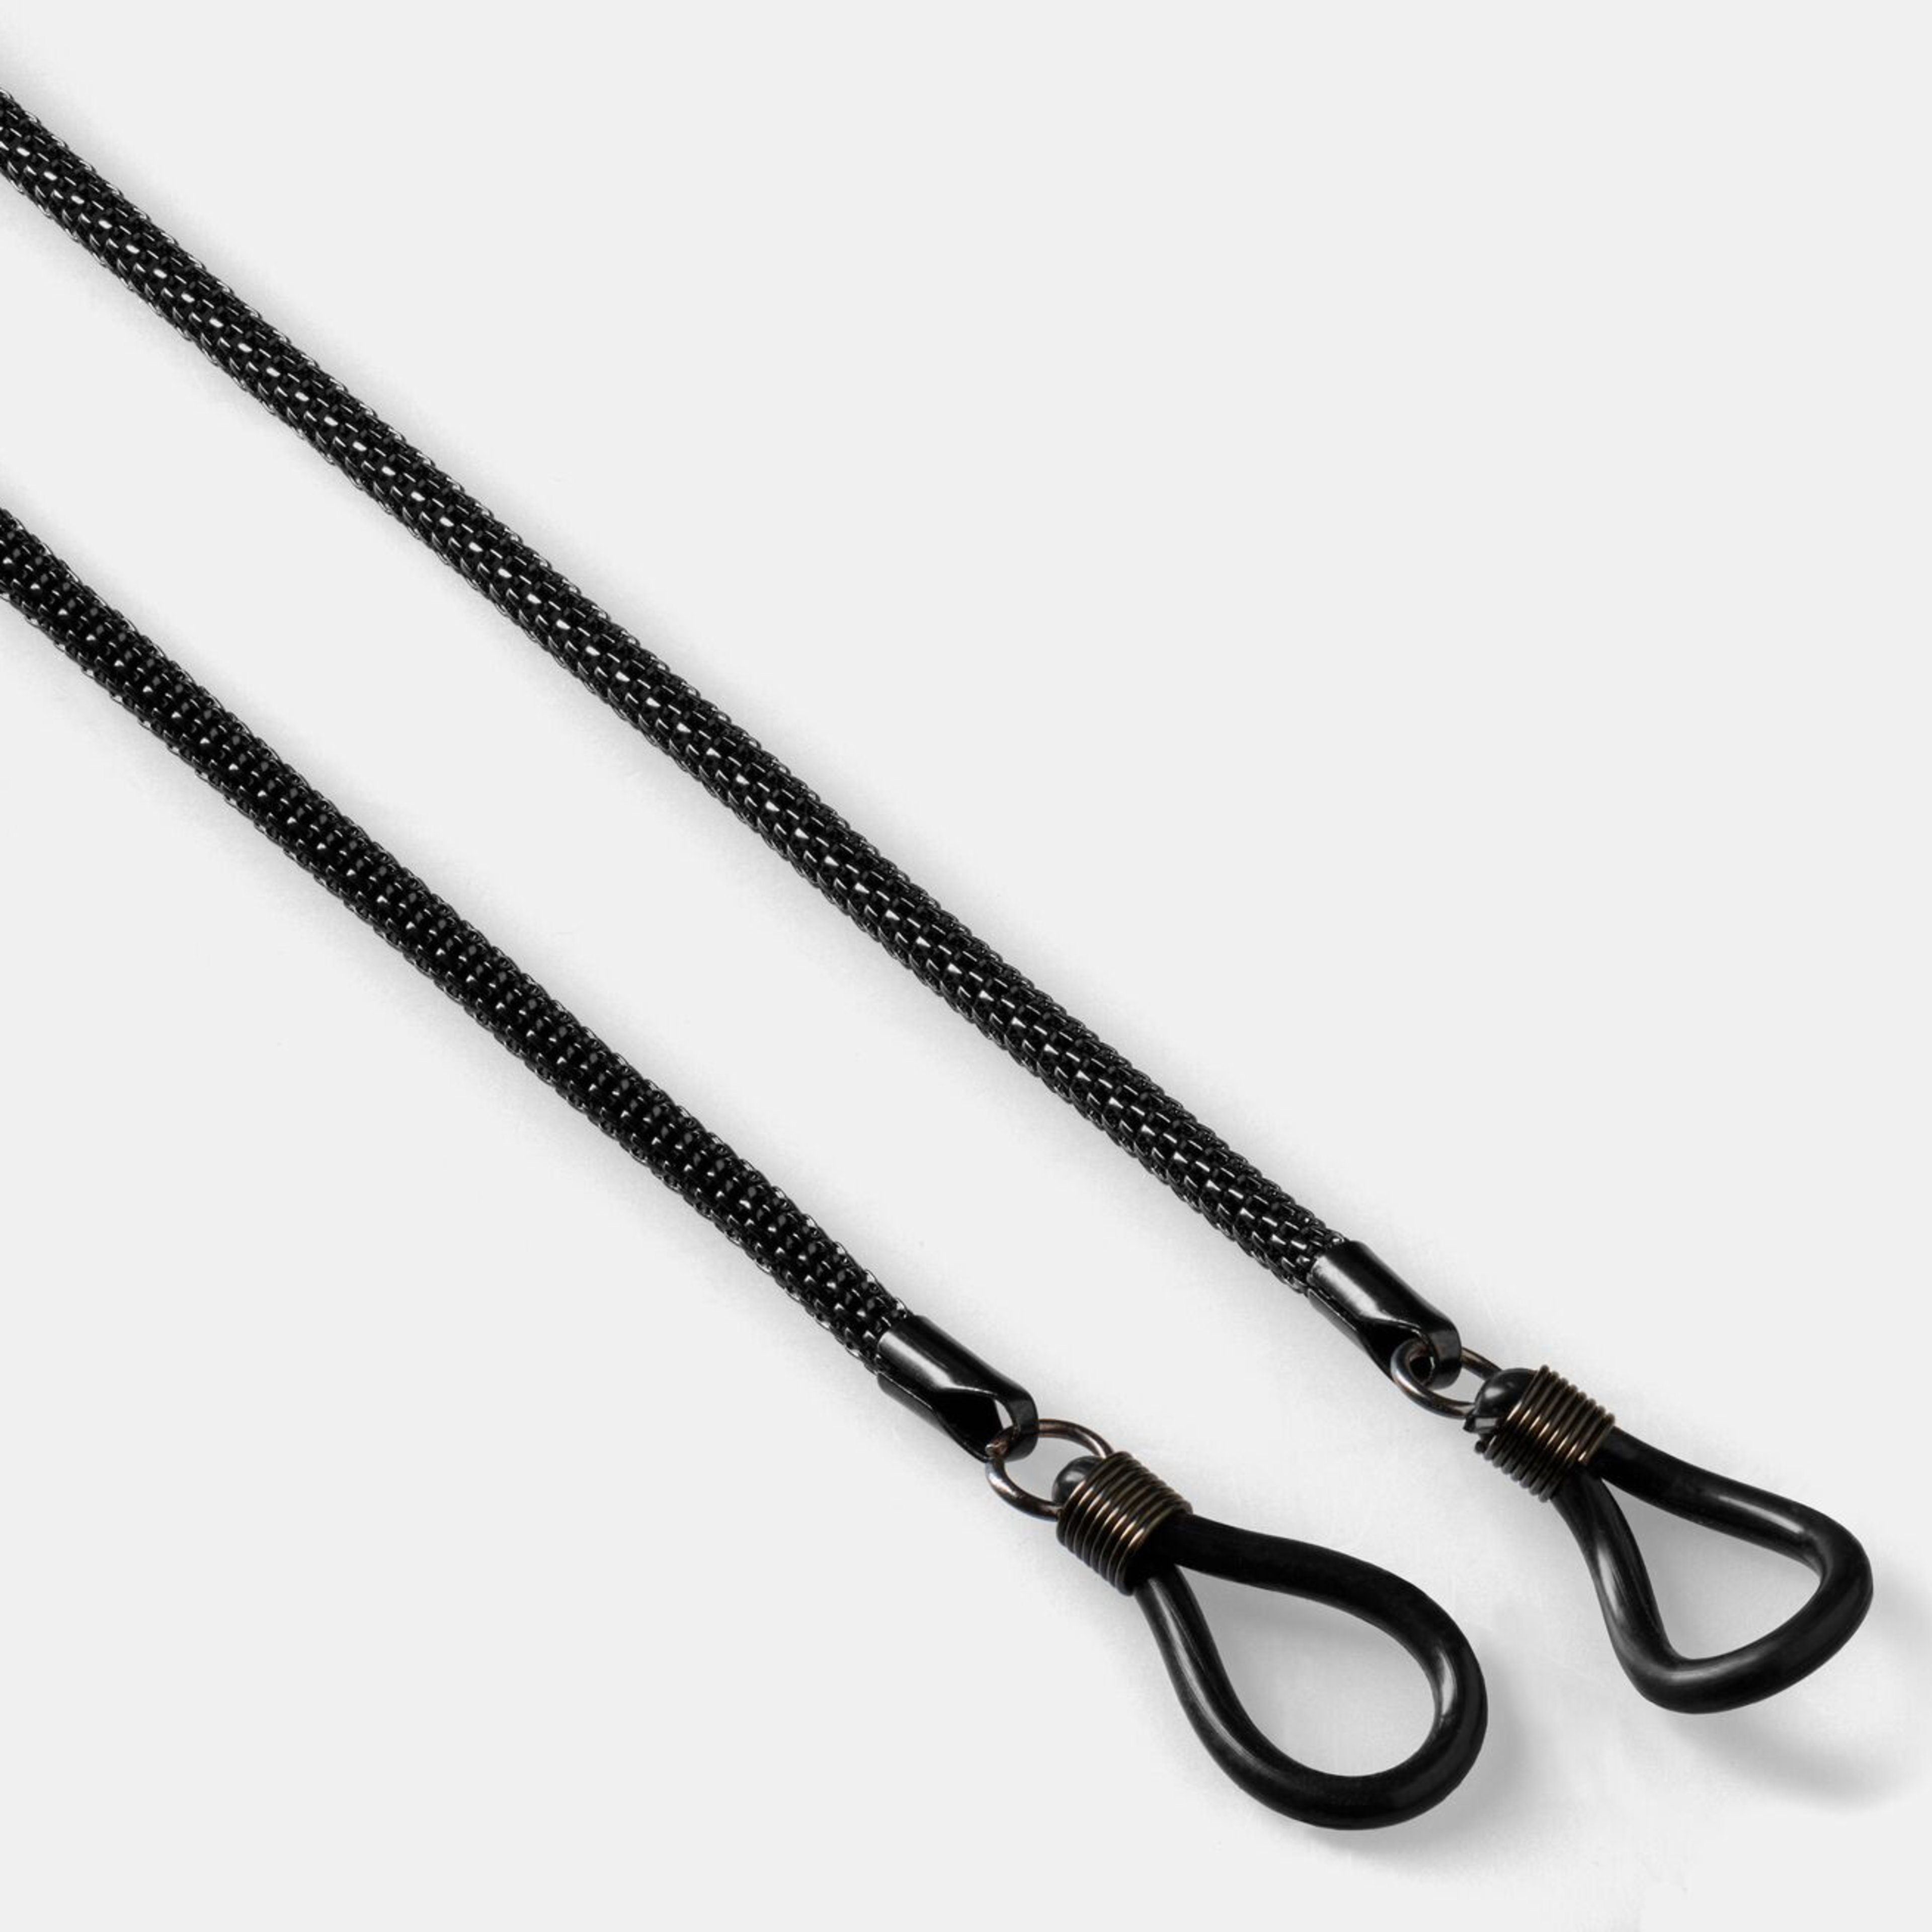 Ace & Tate Accessory Steel Cord 